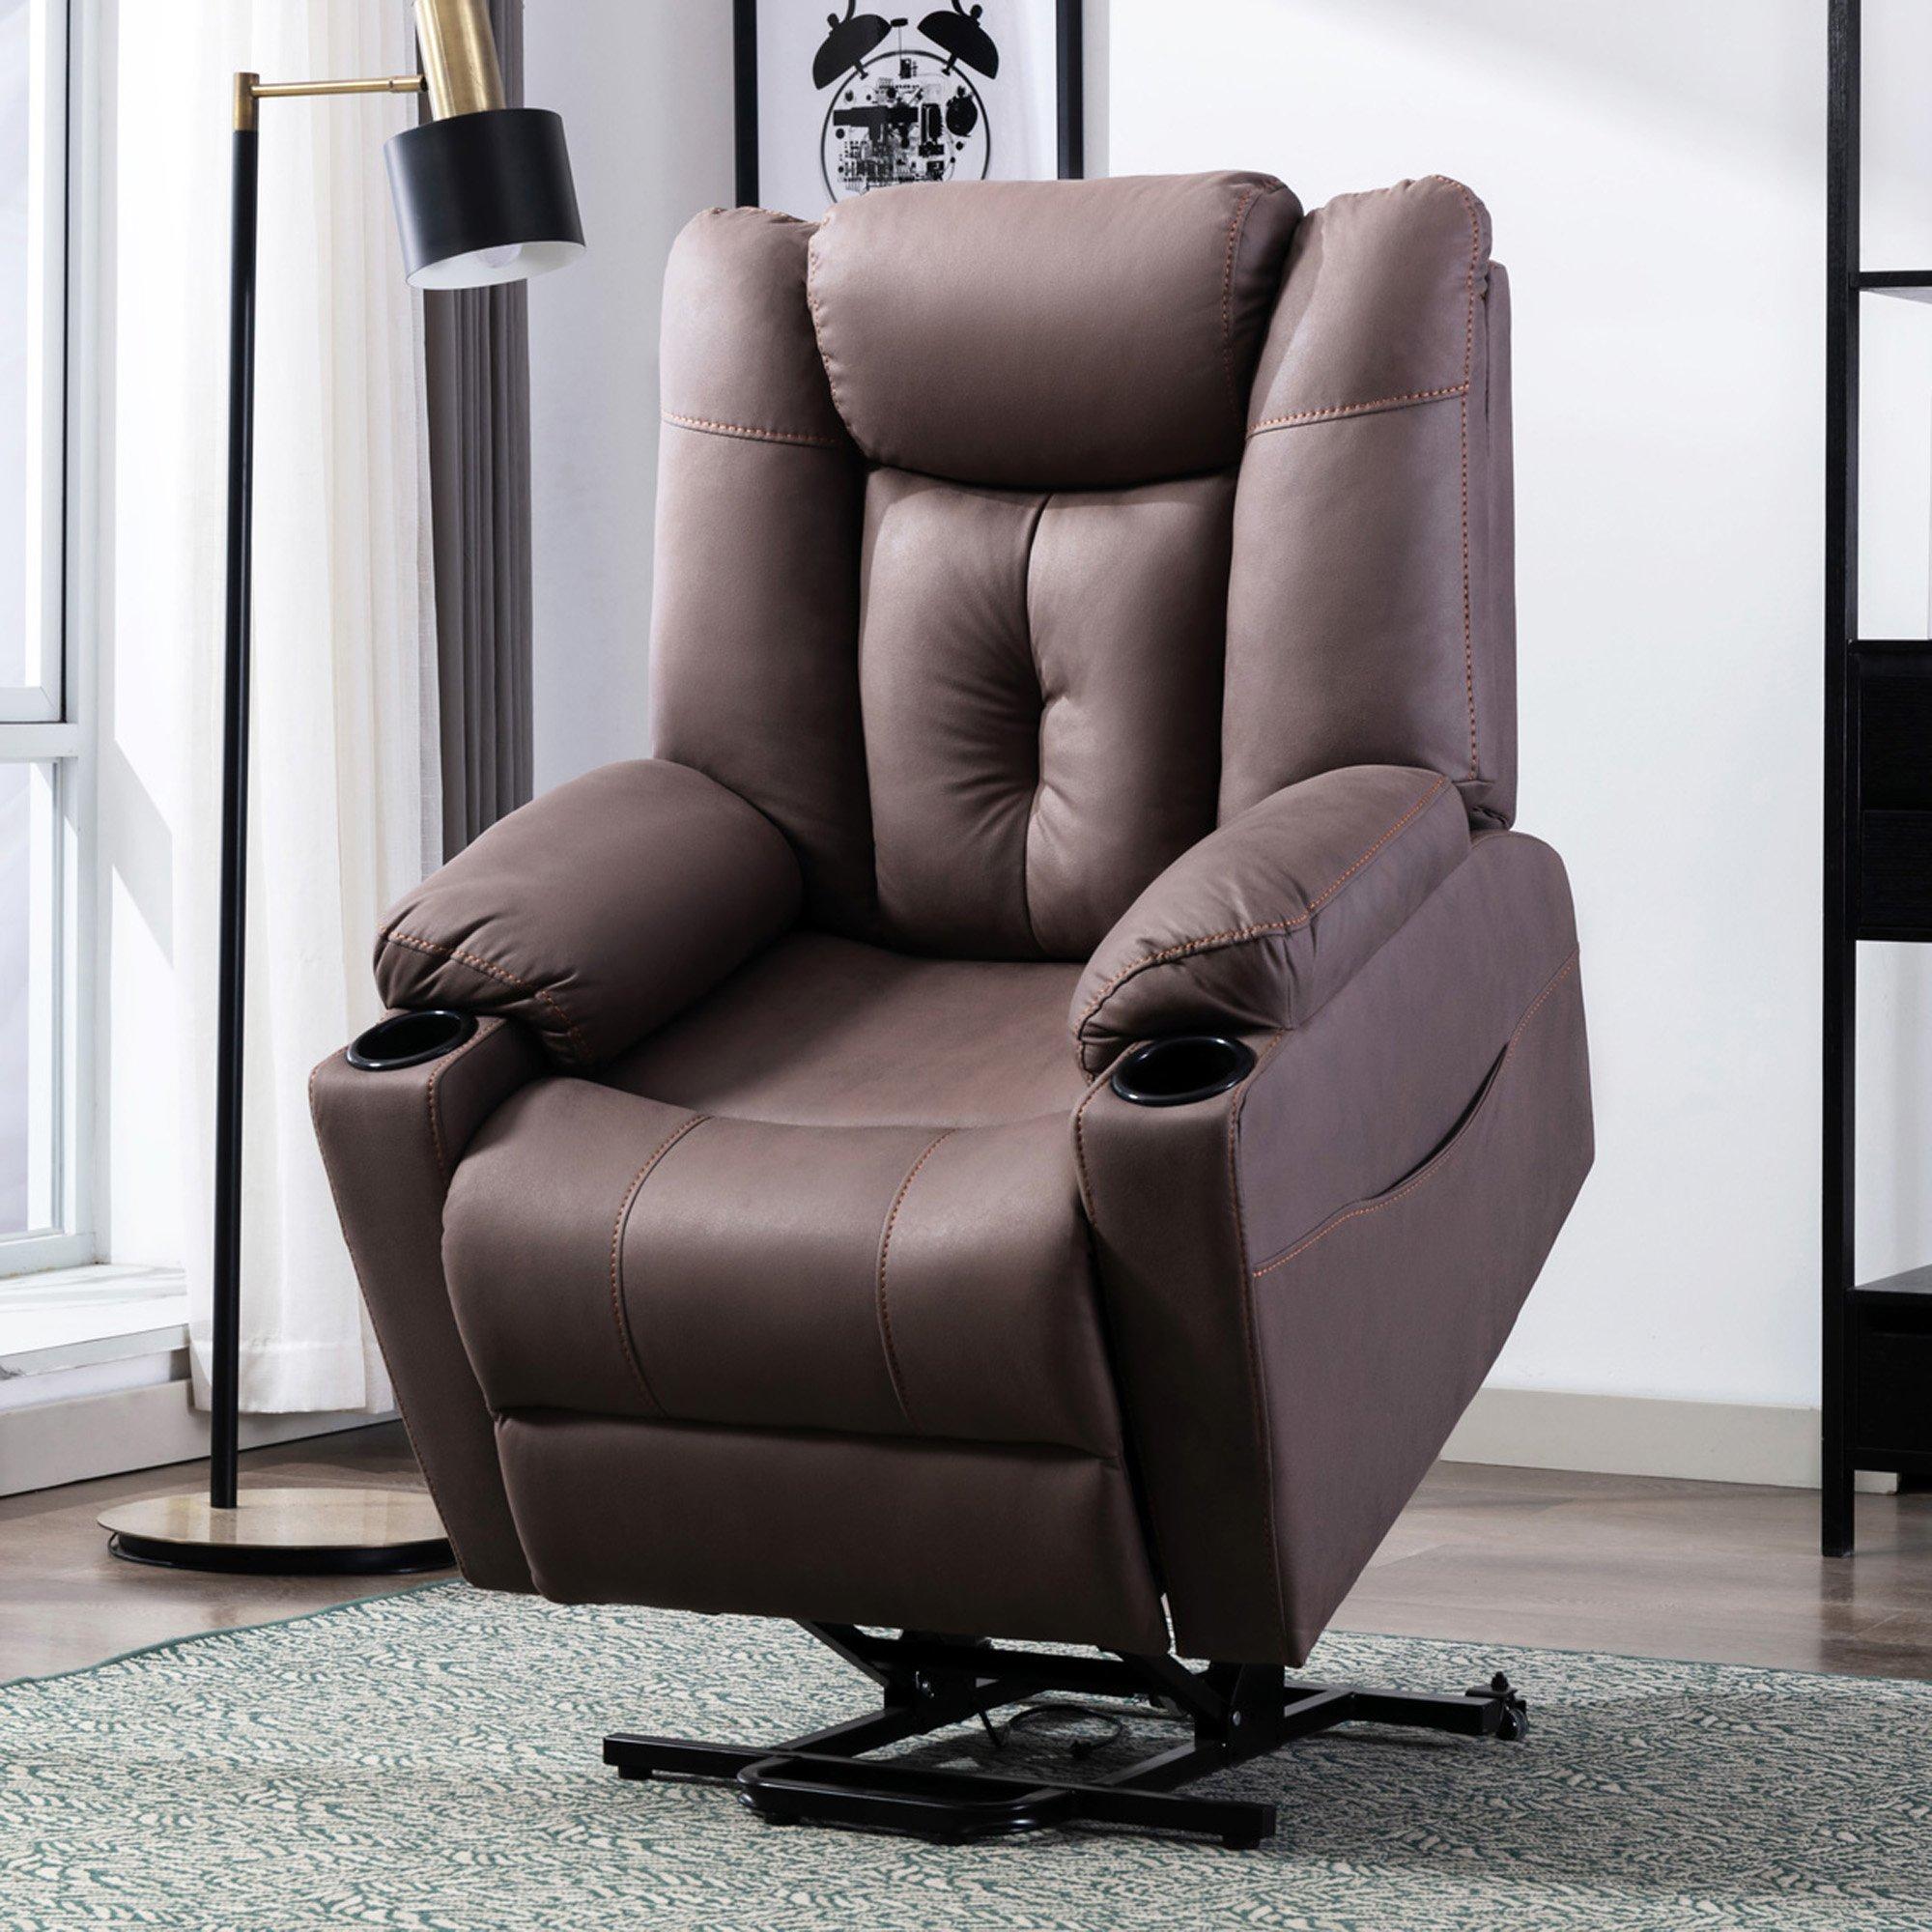 Afton Technology Fabric Single Motor Rise Recliner Lift Mobility Chair